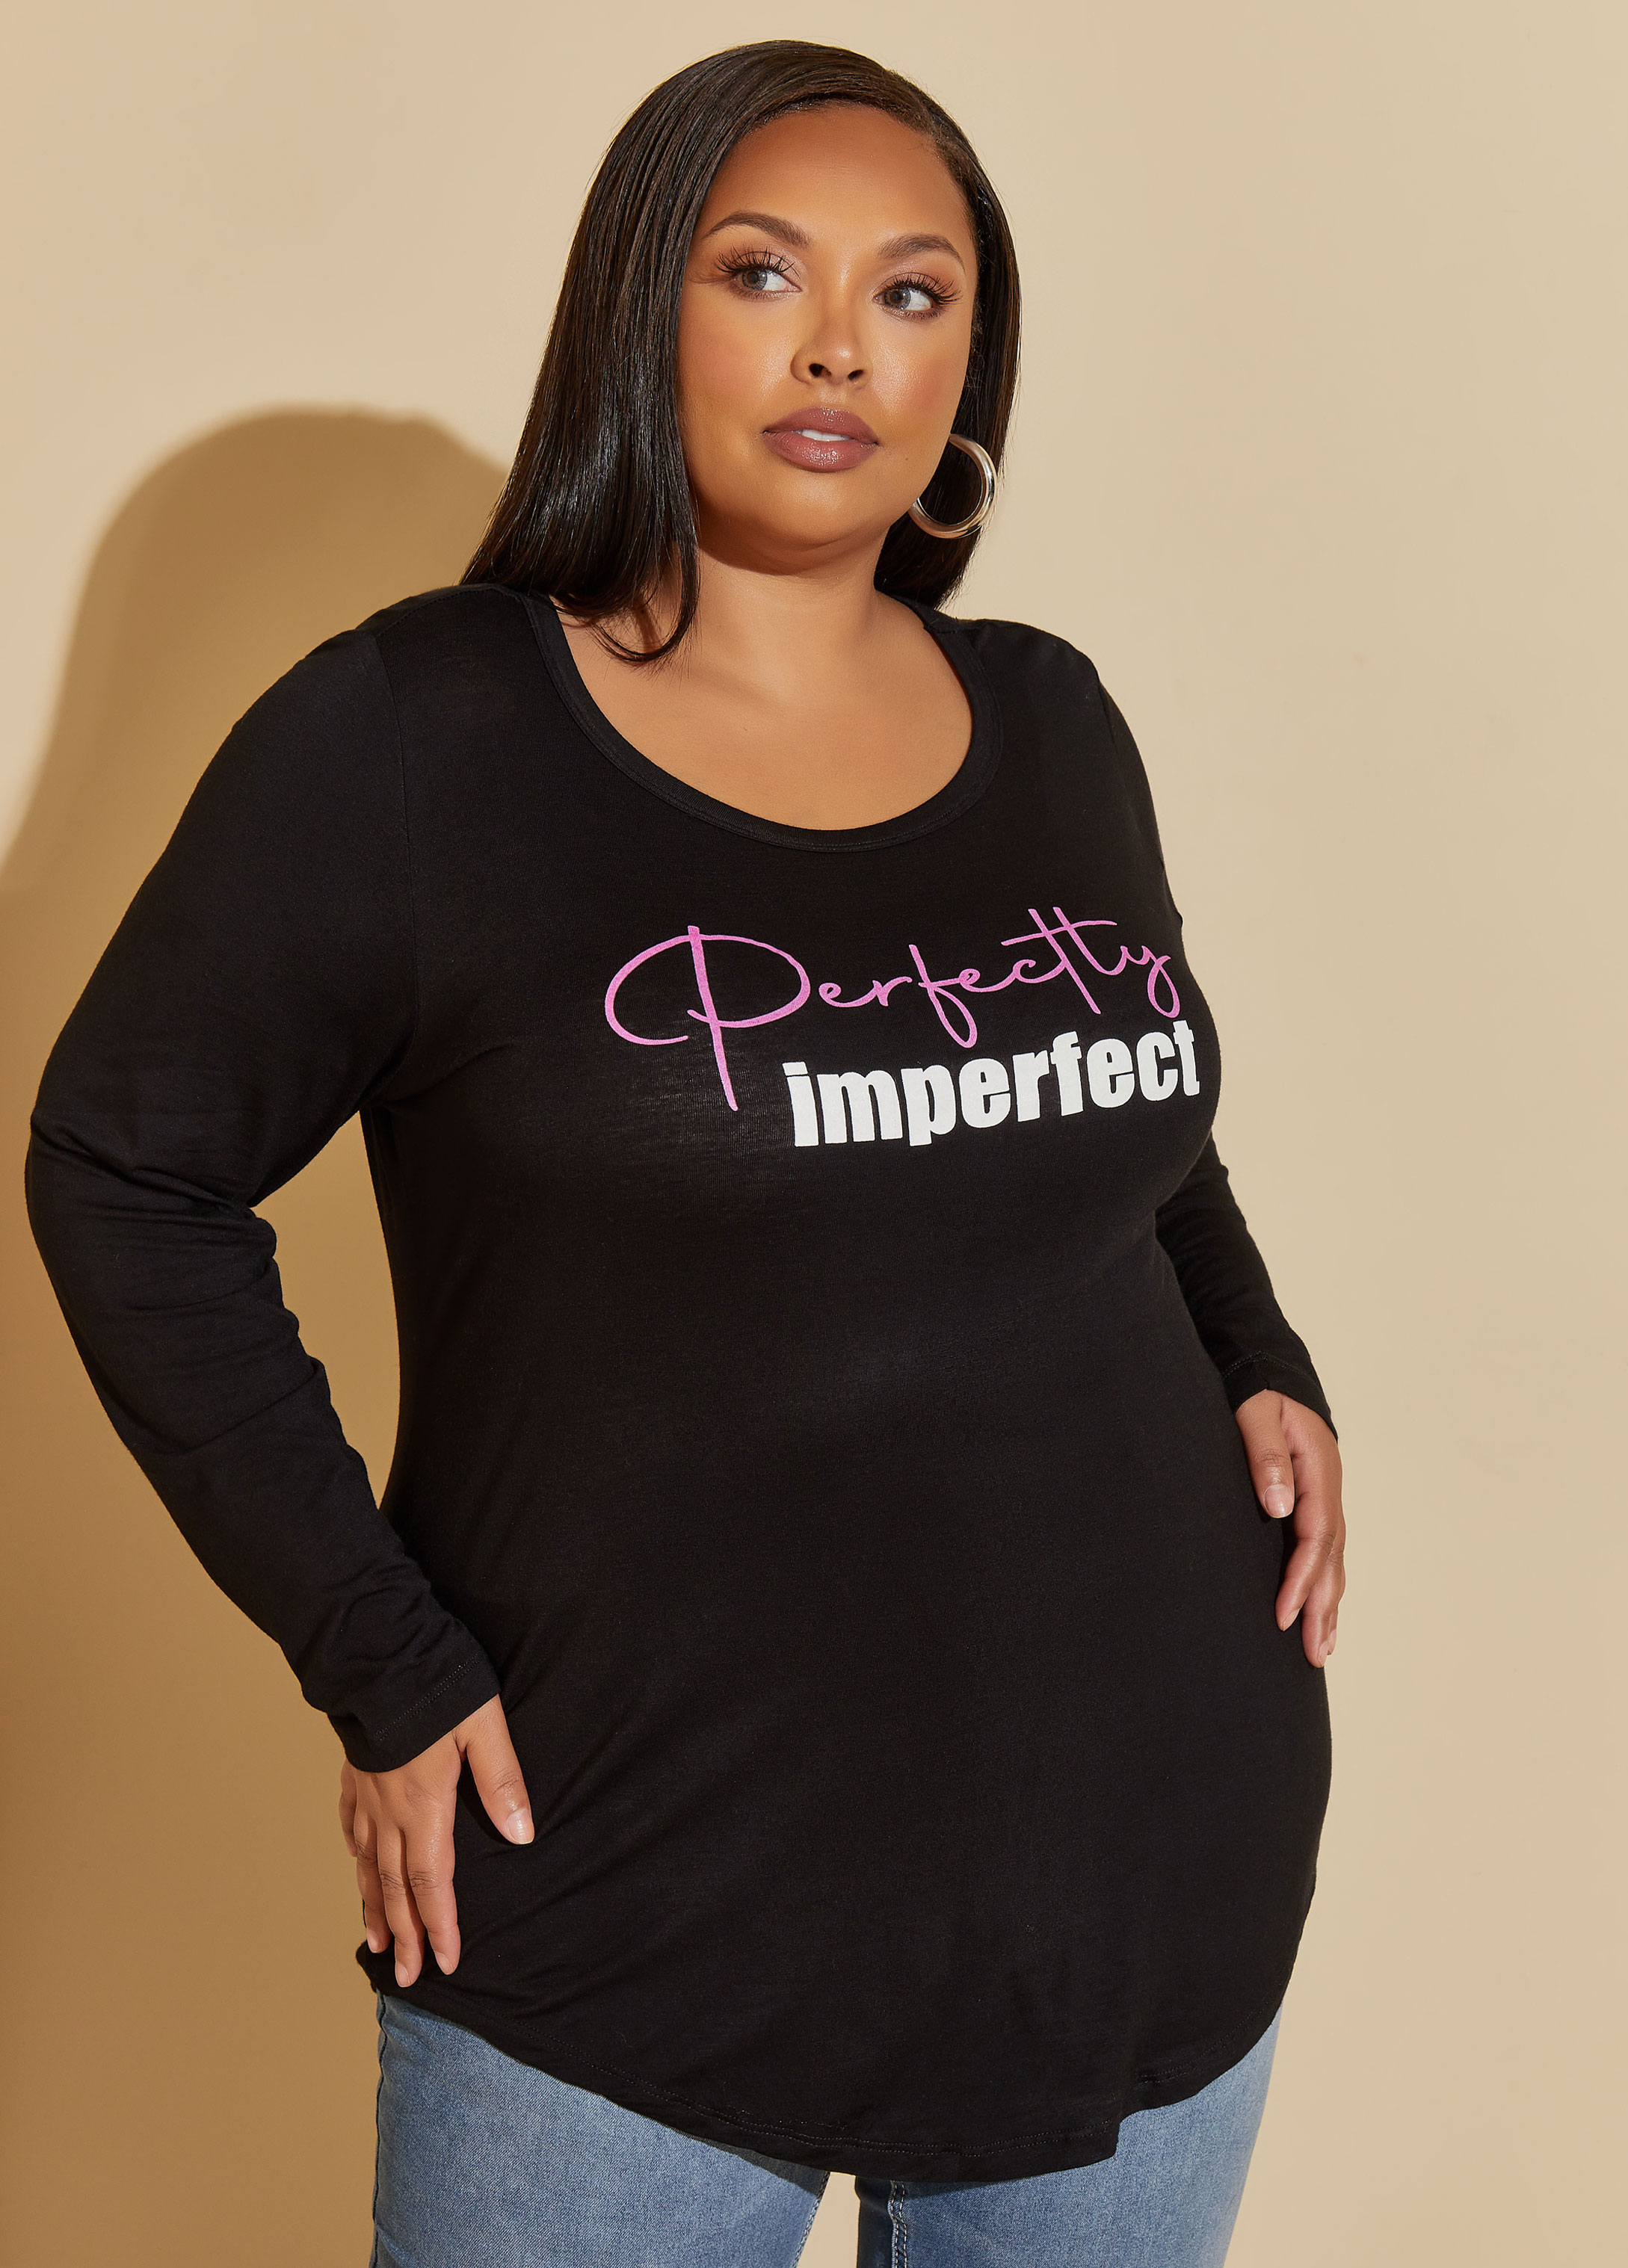 Plus Size Perfectly Imperfect Graphic Tee, BLACK, 26/28 - Ashley Stewart